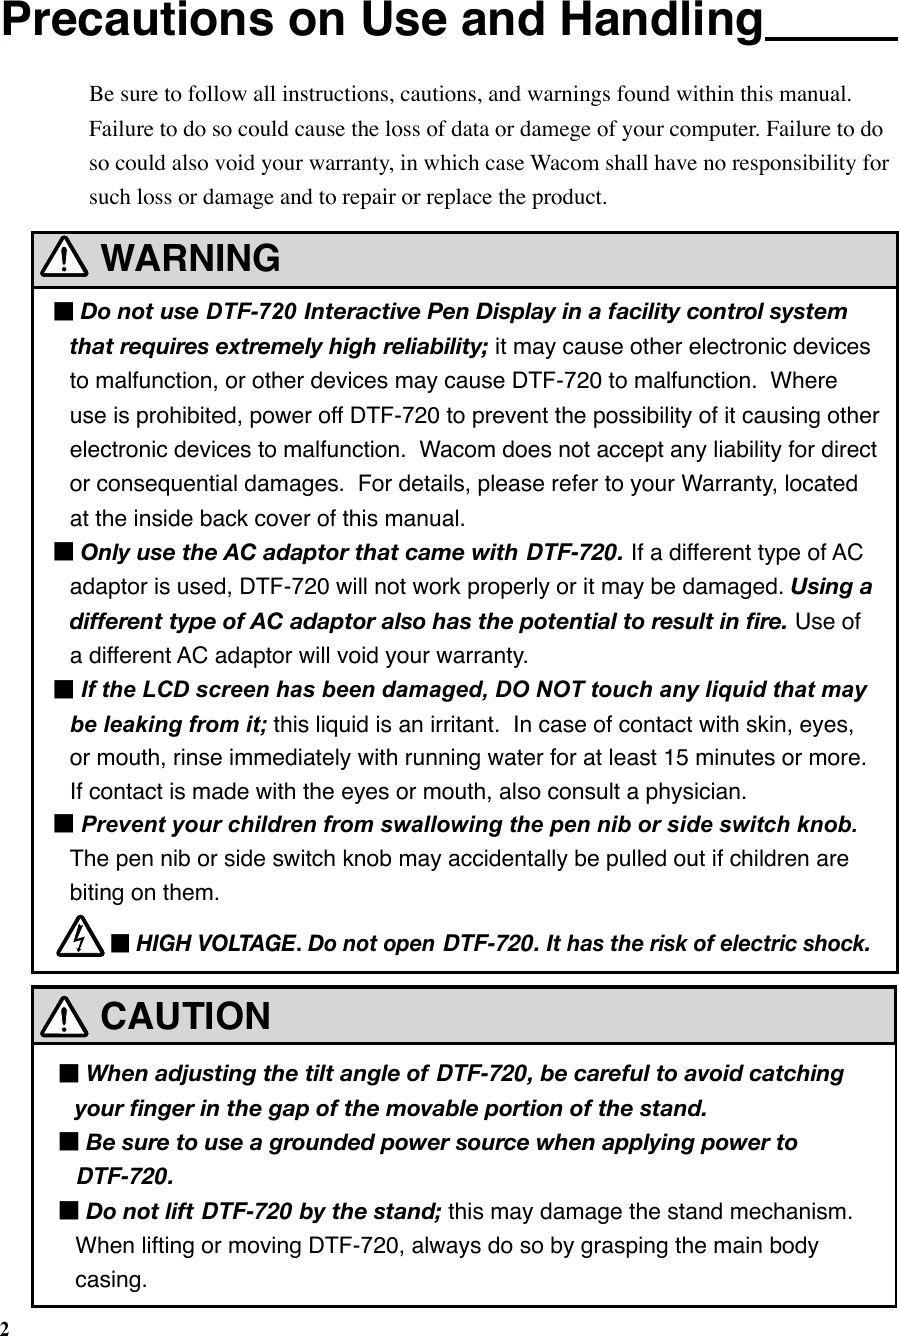 2CAUTIONWARNING■Do not use DTF-720  Interactive Pen Display in a facility control system that requires extremely high reliability; it may cause other electronic devices to malfunction, or other devices may cause DTF-720 to malfunction.  Where use is prohibited, power off DTF-720 to prevent the possibility of it causing other electronic devices to malfunction.  Wacom does not accept any liability for direct or consequential damages.  For details, please refer to your Warranty, located at the inside back cover of this manual.■Only use the AC adaptor that came with DTF-720. If a different type of AC  adaptor is used, DTF-720 will not work properly or it may be damaged. Using a different type of AC adaptor also has the potential to result in ﬁre. Use of a different AC adaptor will void your warranty.■If the LCD screen has been damaged, DO NOT touch any liquid that may be leaking from it; this liquid is an irritant.  In case of contact with skin, eyes, or mouth, rinse immediately with running water for at least 15 minutes or more.  If contact is made with the eyes or mouth, also consult a physician.■Prevent your children from swallowing the pen nib or side switch knob. The pen nib or side switch knob may accidentally be pulled out if children are biting on them.■HIGH VOLTAGE. Do not open DTF-720. It has the risk of electric shock.Precautions on Use and HandlingBe sure to follow all instructions, cautions, and warnings found within this manual.  Failure to do so could cause the loss of data or damege of your computer. Failure to do so could also void your warranty, in which case Wacom shall have no responsibility for such loss or damage and to repair or replace the product.■When adjusting the tilt angle of DTF-720, be careful to avoid catching your ﬁnger in the gap of the movable portion of the stand.■Be sure to use a grounded power source when applying power to DTF-720.■Do not lift DTF-720 by the stand; this may damage the stand mechanism.  When lifting or moving DTF-720, always do so by grasping the main body casing.